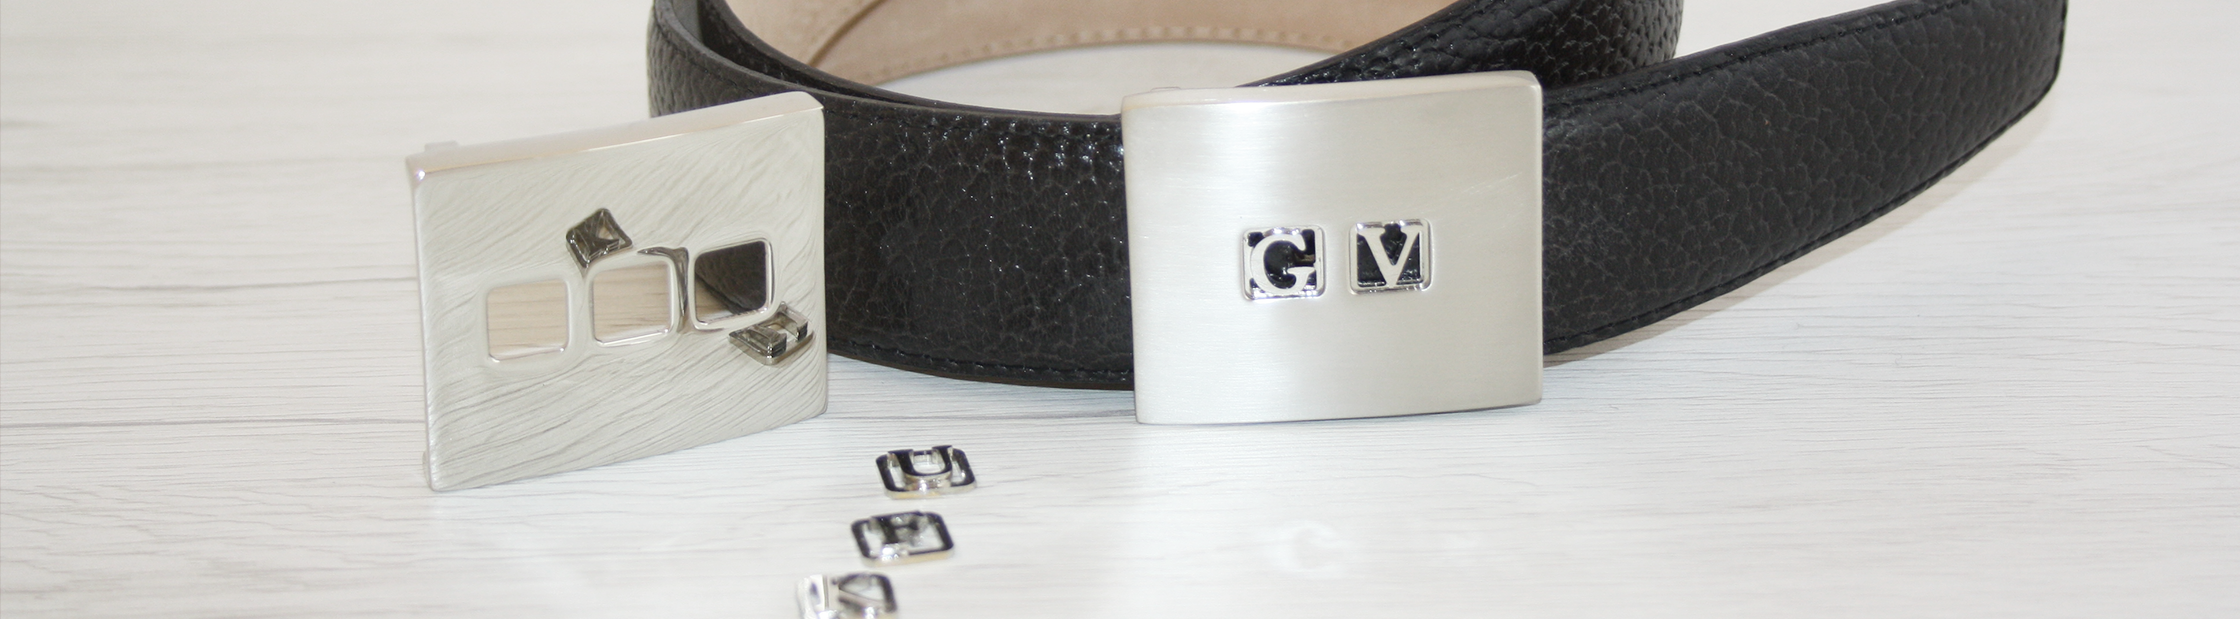 Personalized buckle